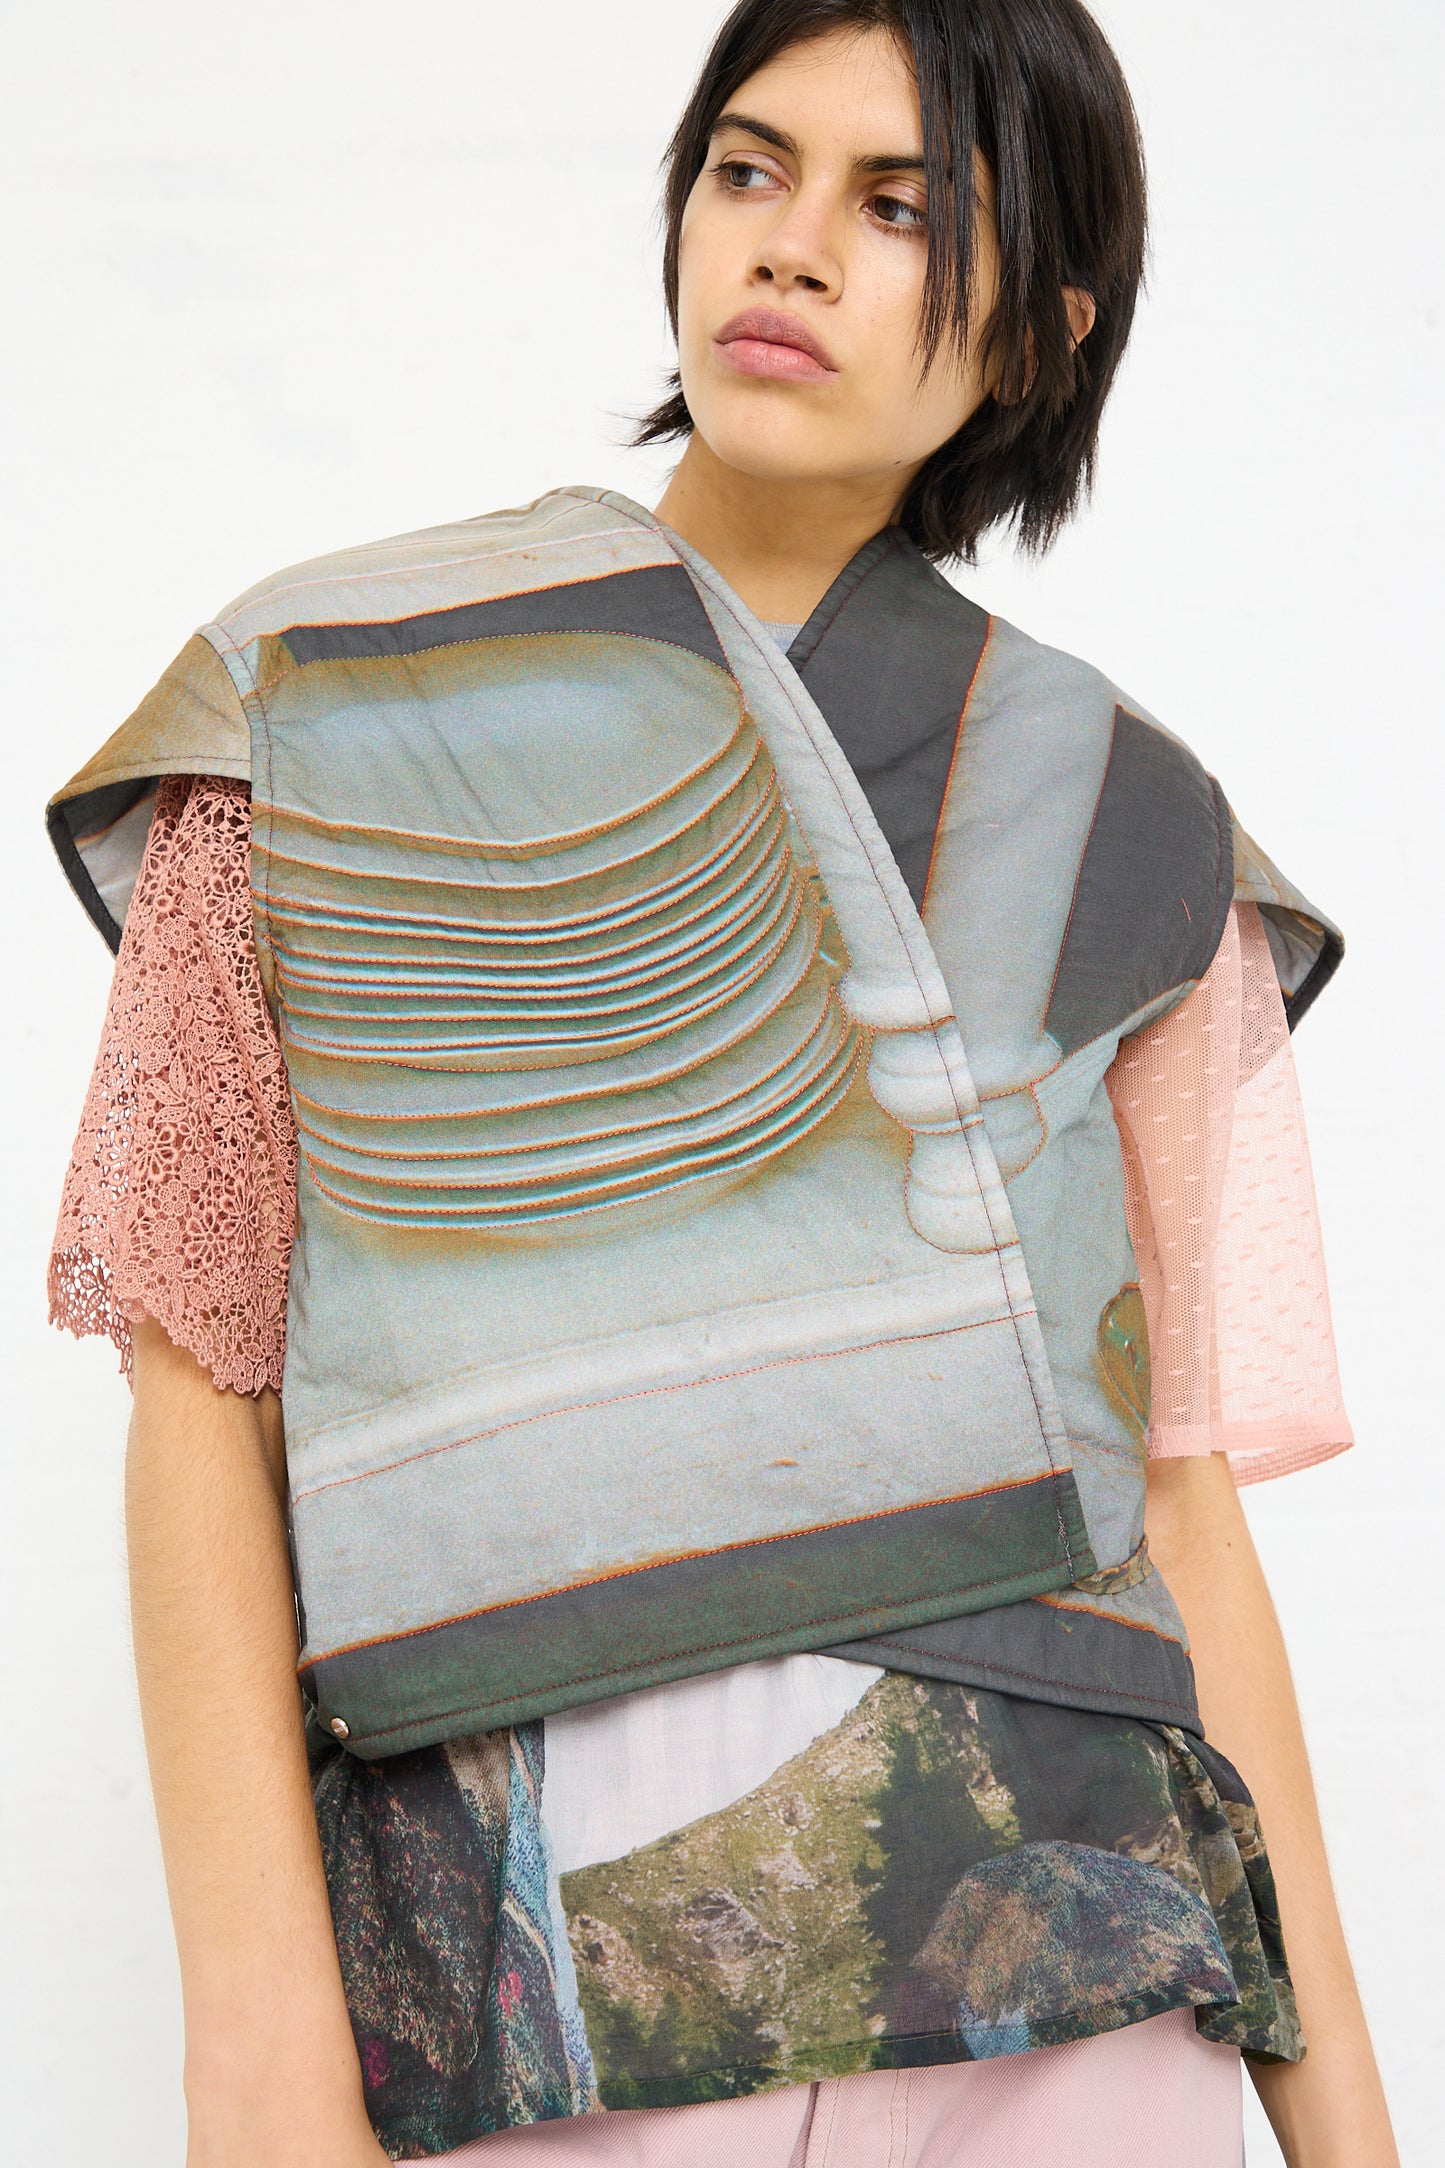 A person wearing an avant-garde, multilayered and textured outfit, highlighted by an oversized Cotton No. 77 Summer Living vest in print from the Bless luxury brand, with a contemplative expression.